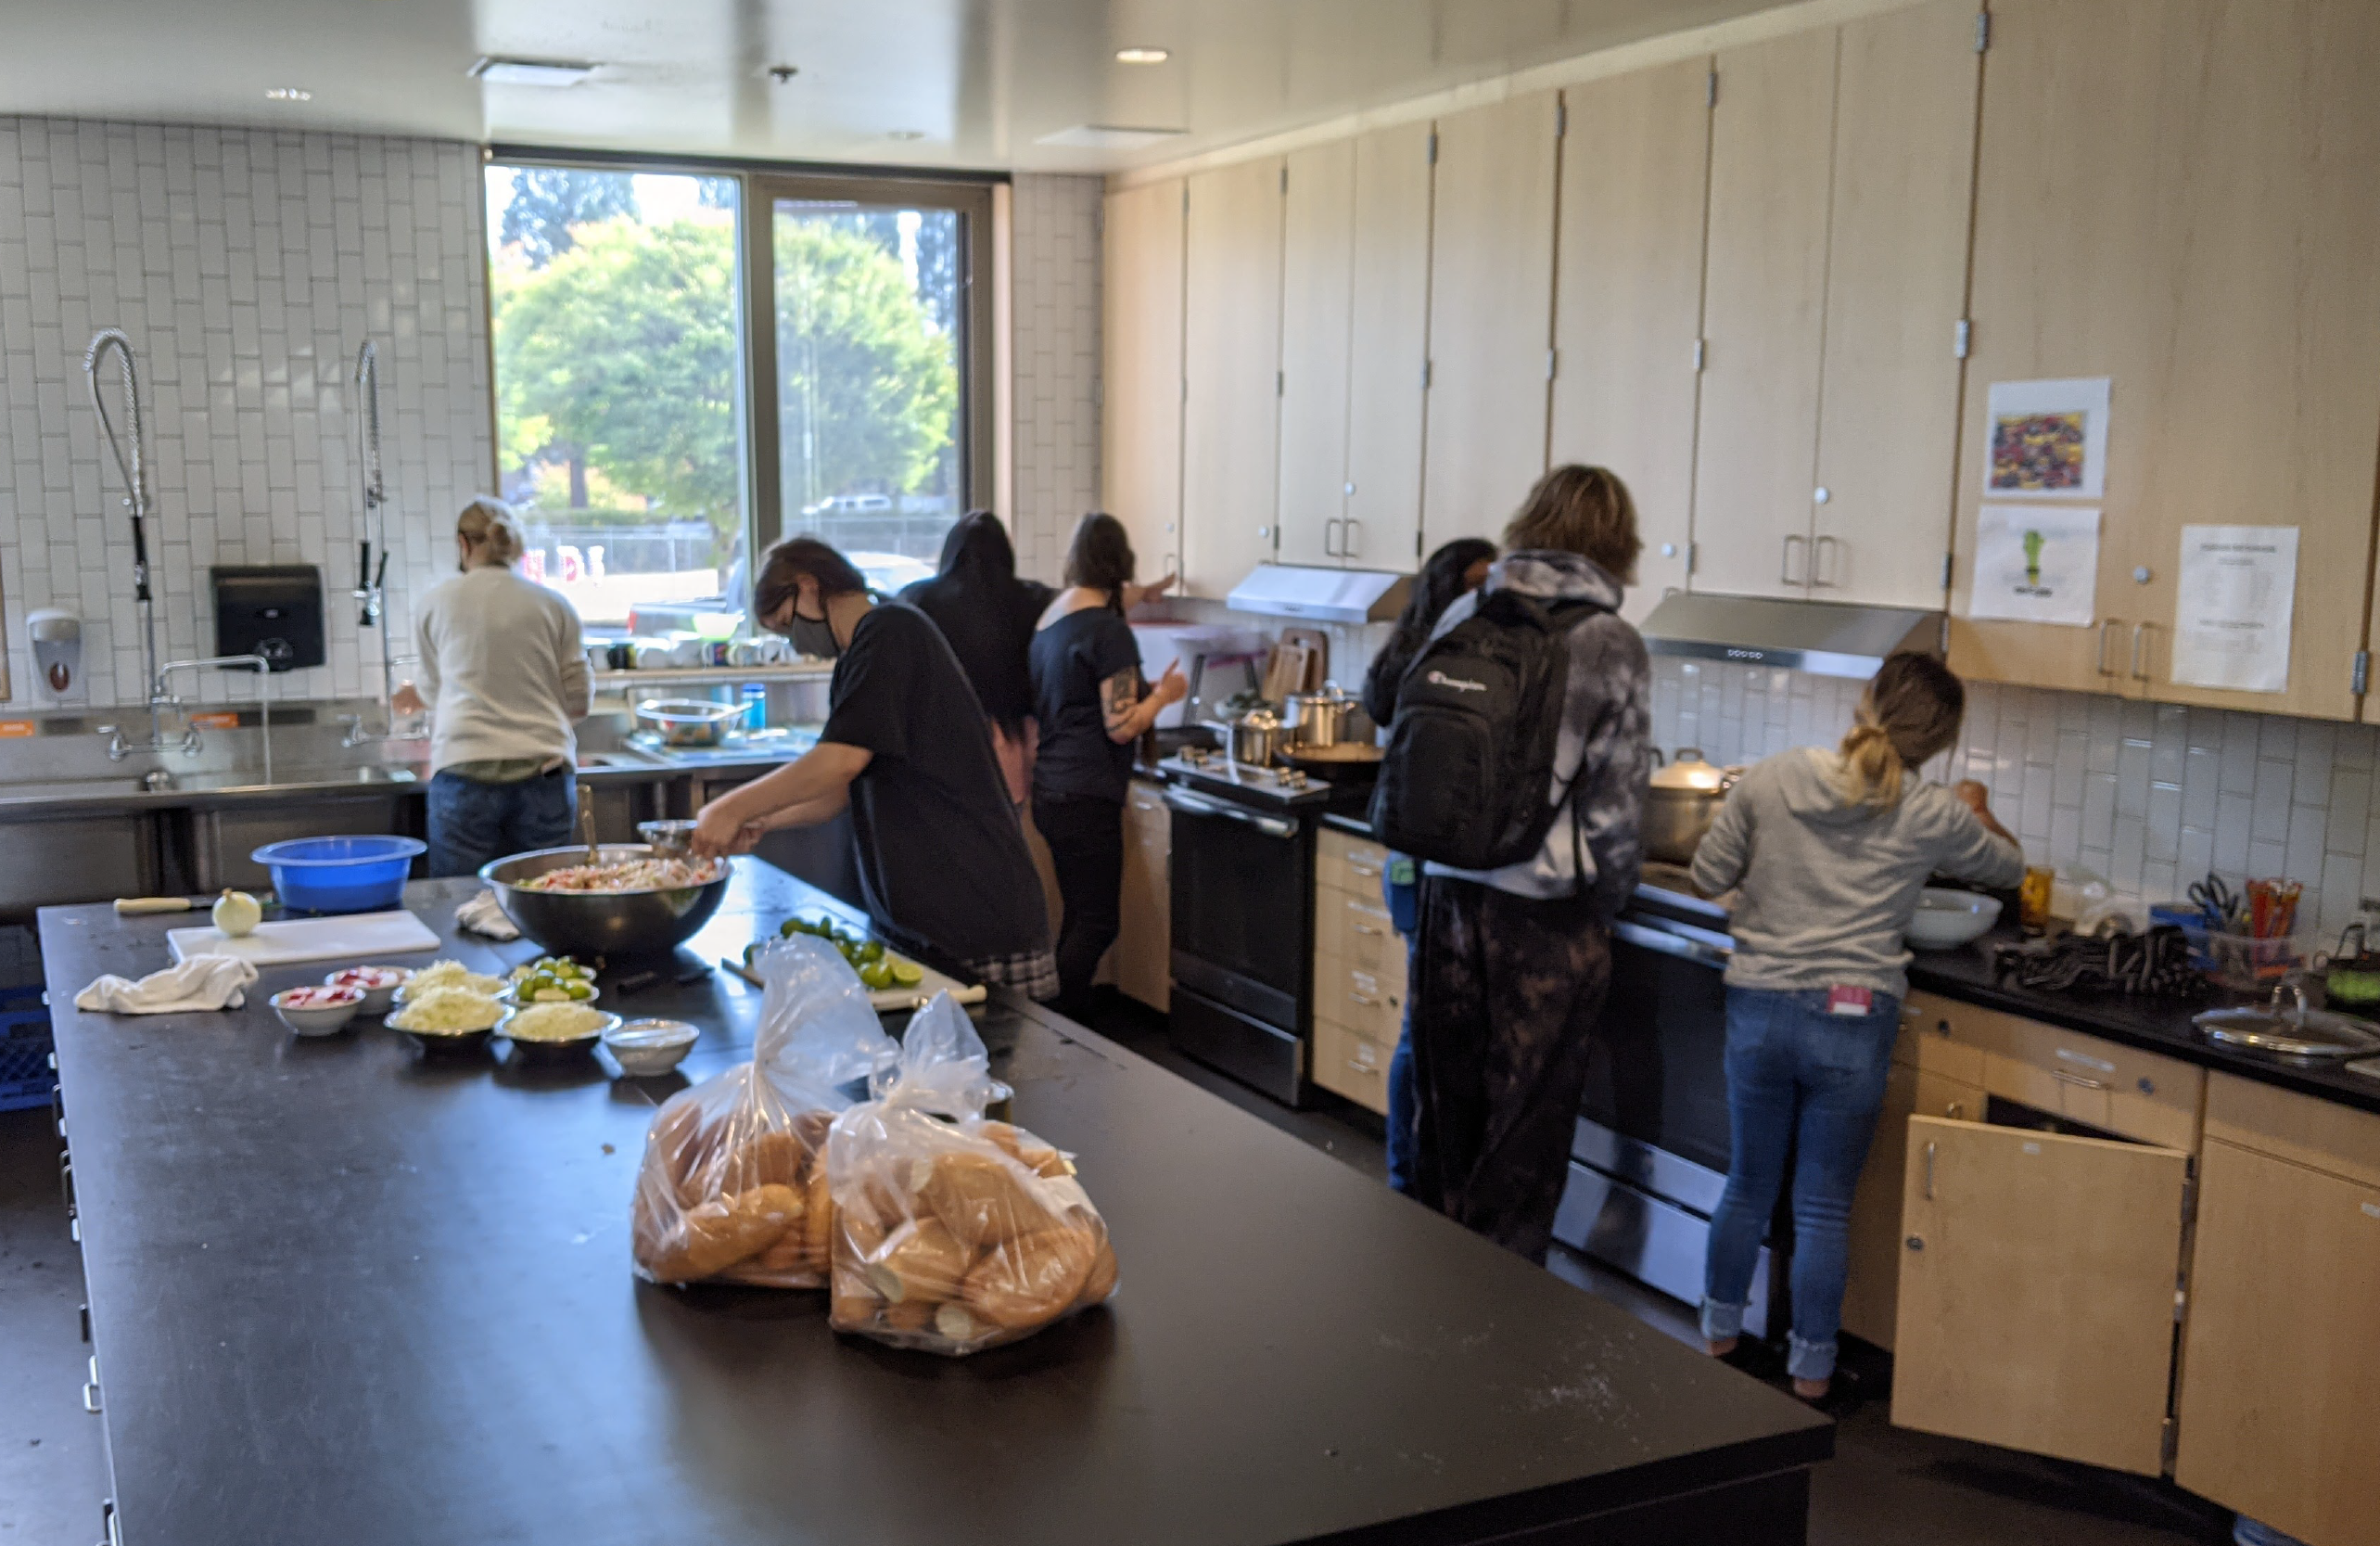 Culinary students prepare the weekly Community Lunch at Creekside Community High School, earning a partial internship credit and real life skills in catering